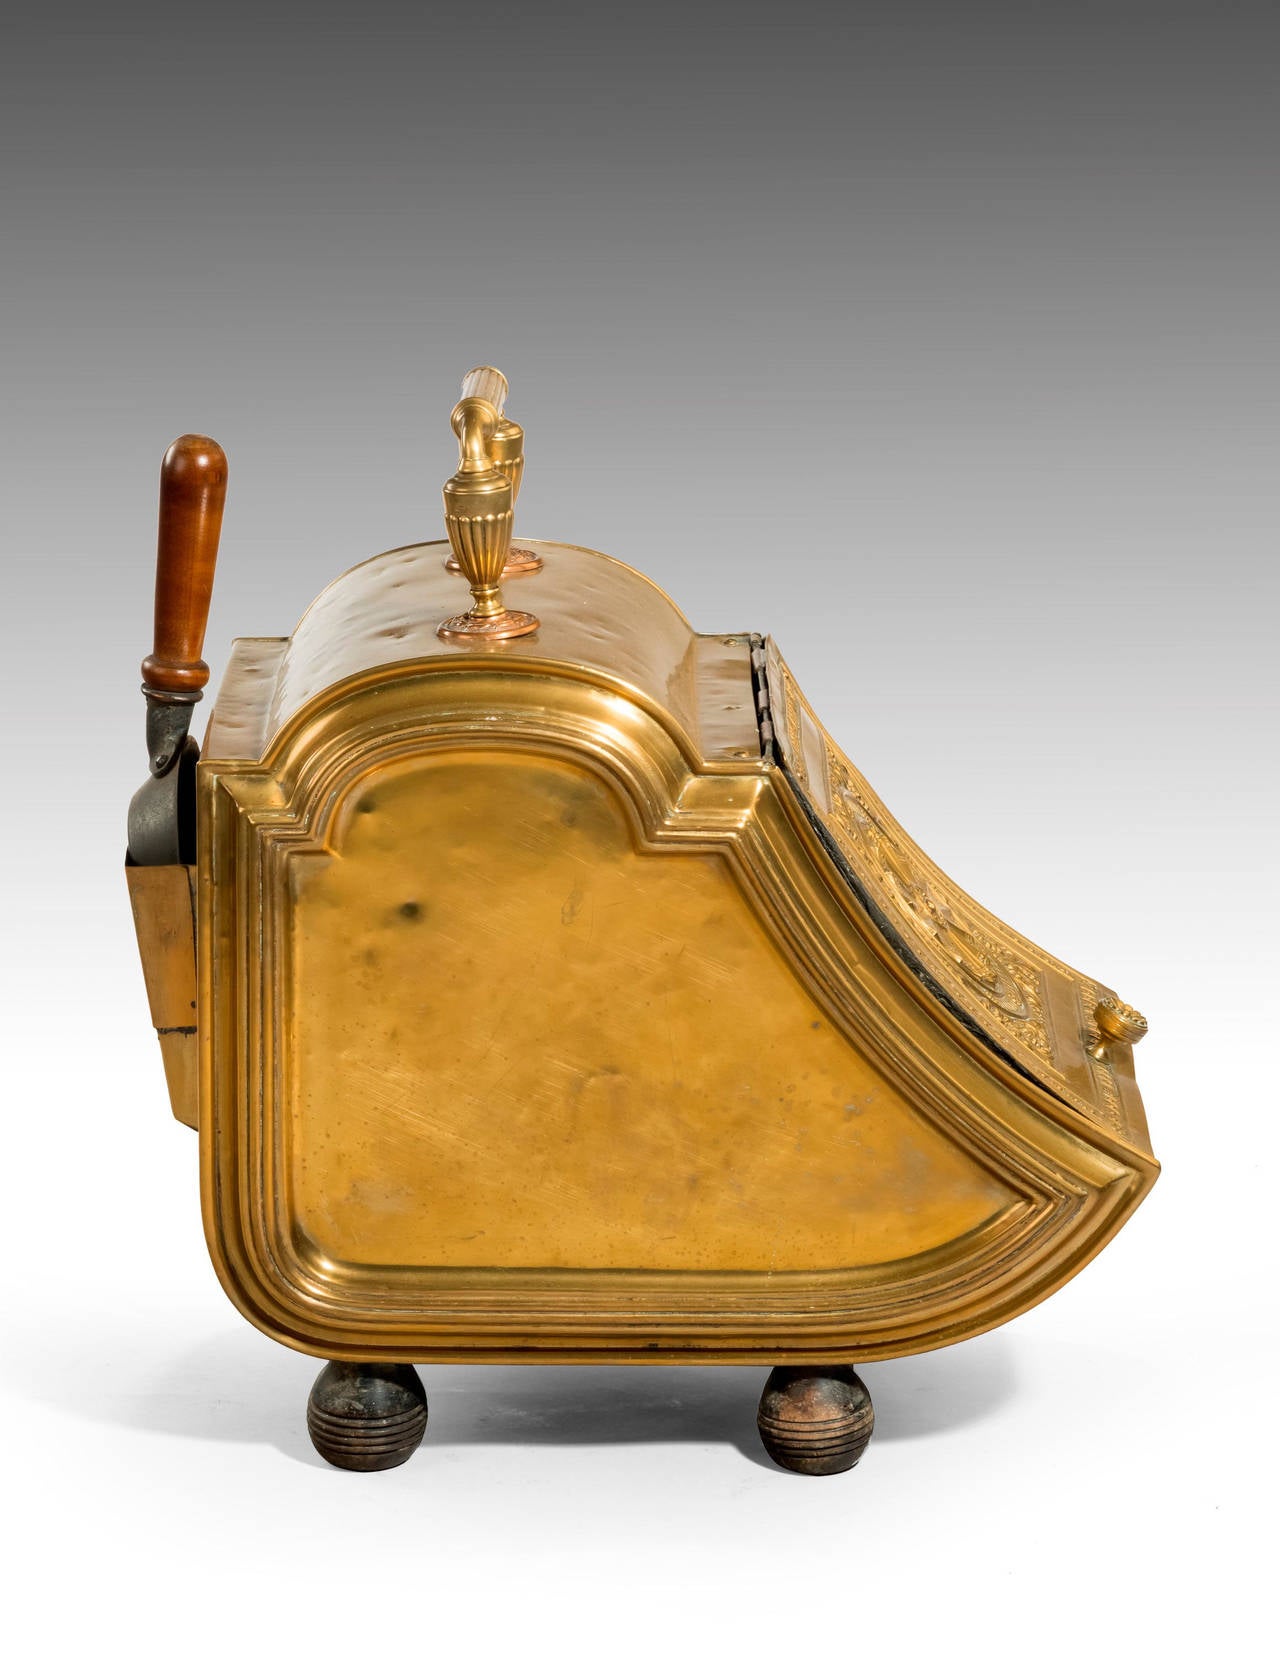 A shaped and embossed 19th century coal podium with a lift up lid to the central section. Heavily embossed details fitted to the shell at the back. The Shovel period but not original.